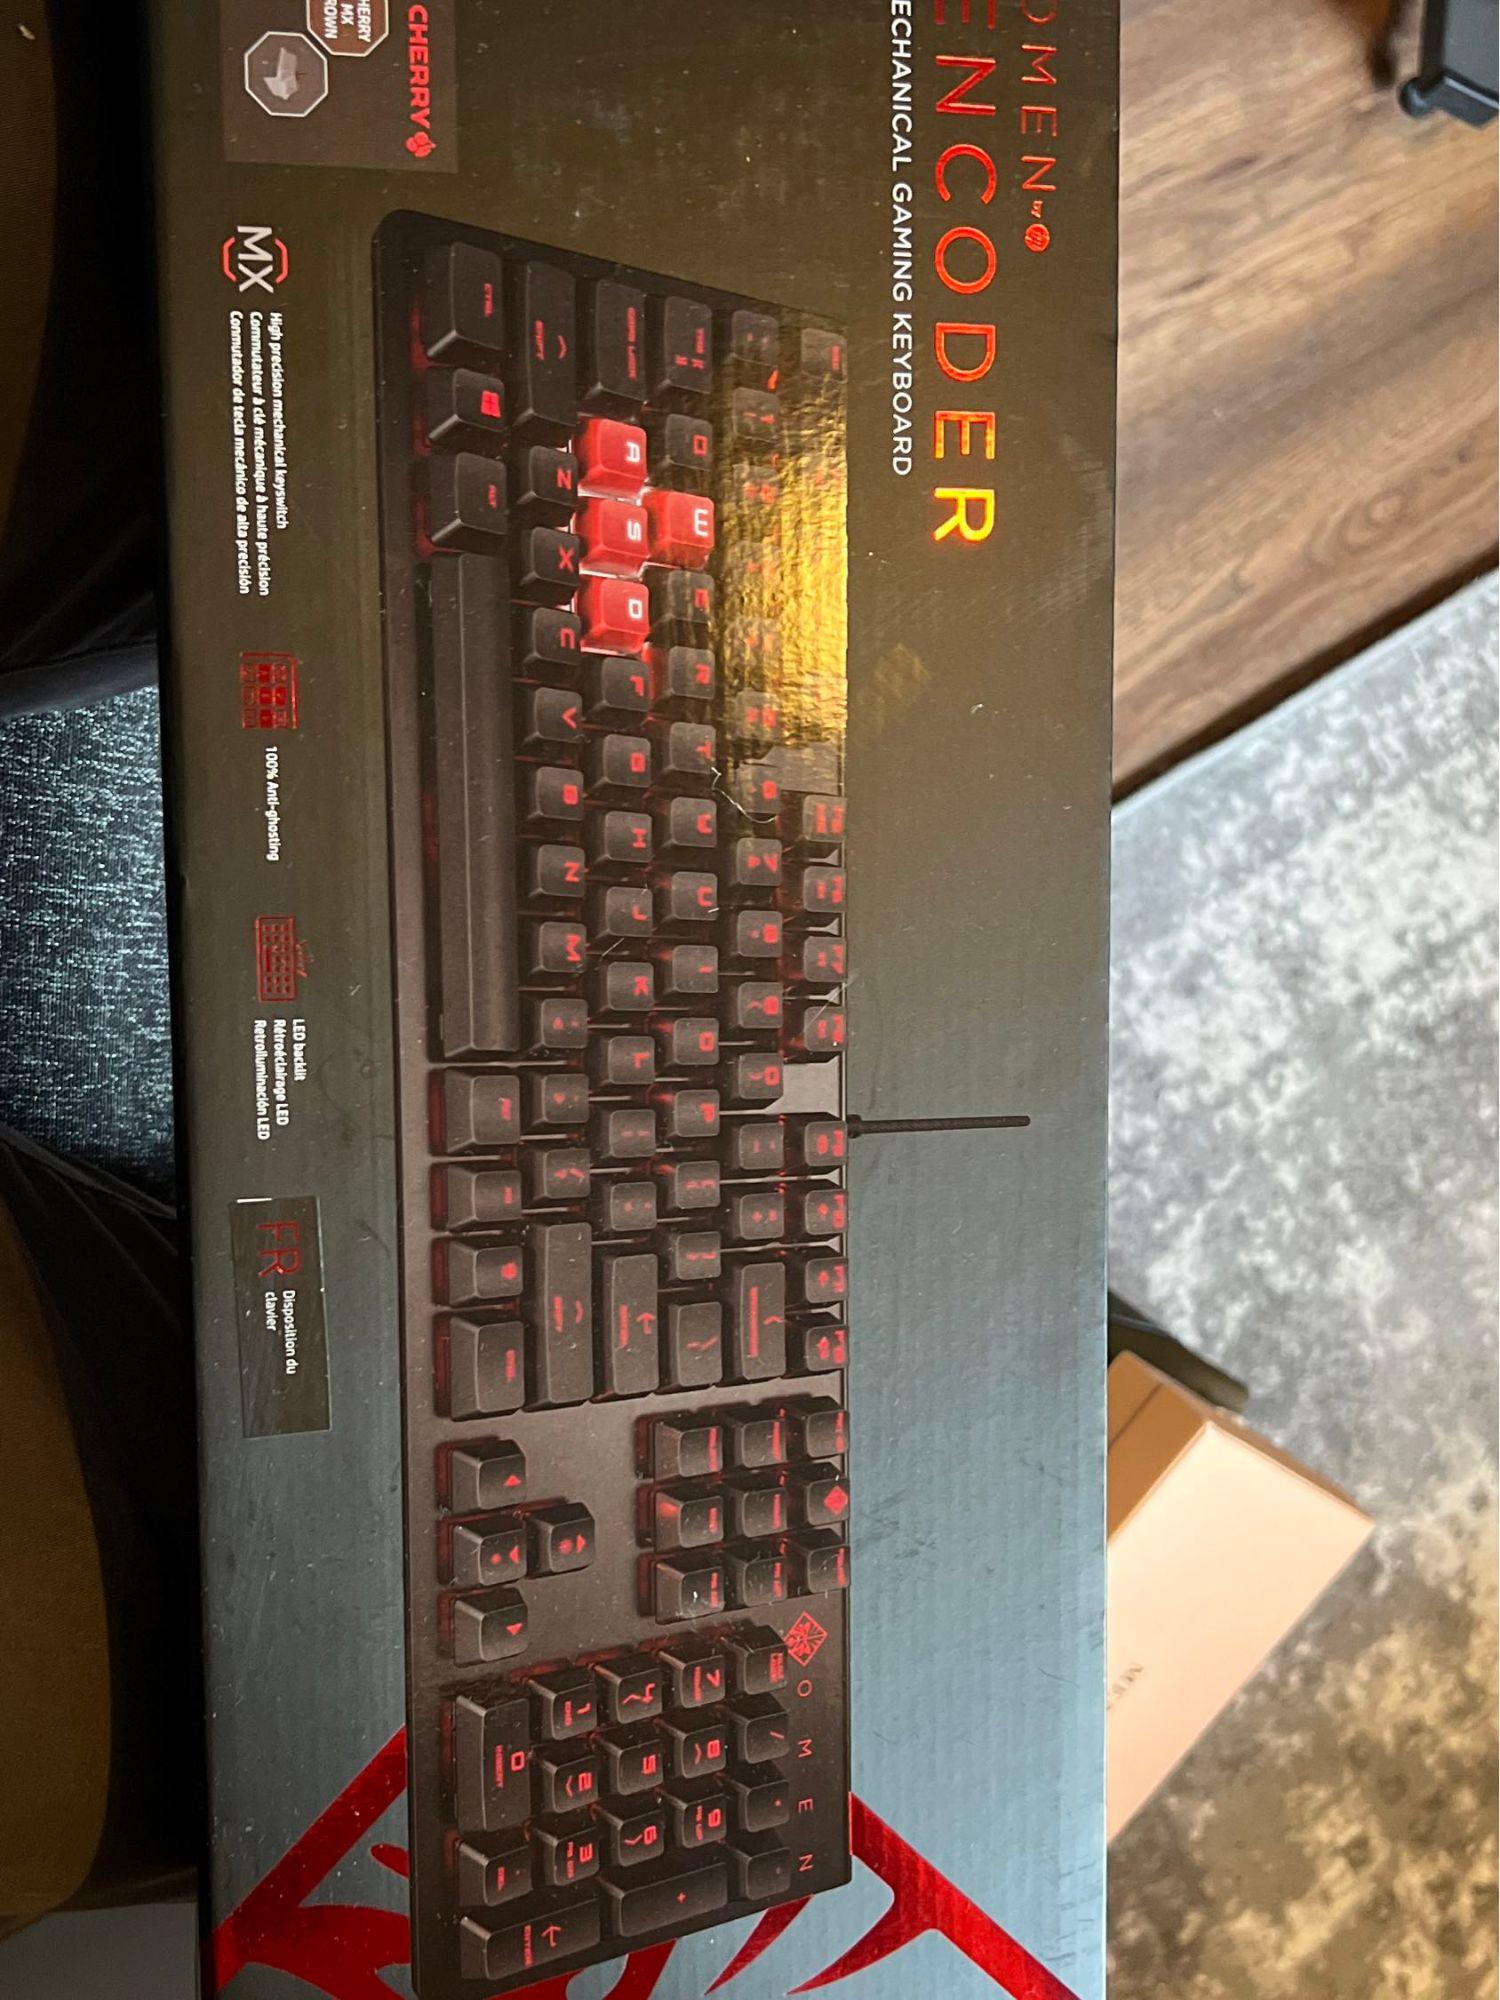 Clavier filaire gaming Omen Encoder - AZERTY - HP Store France